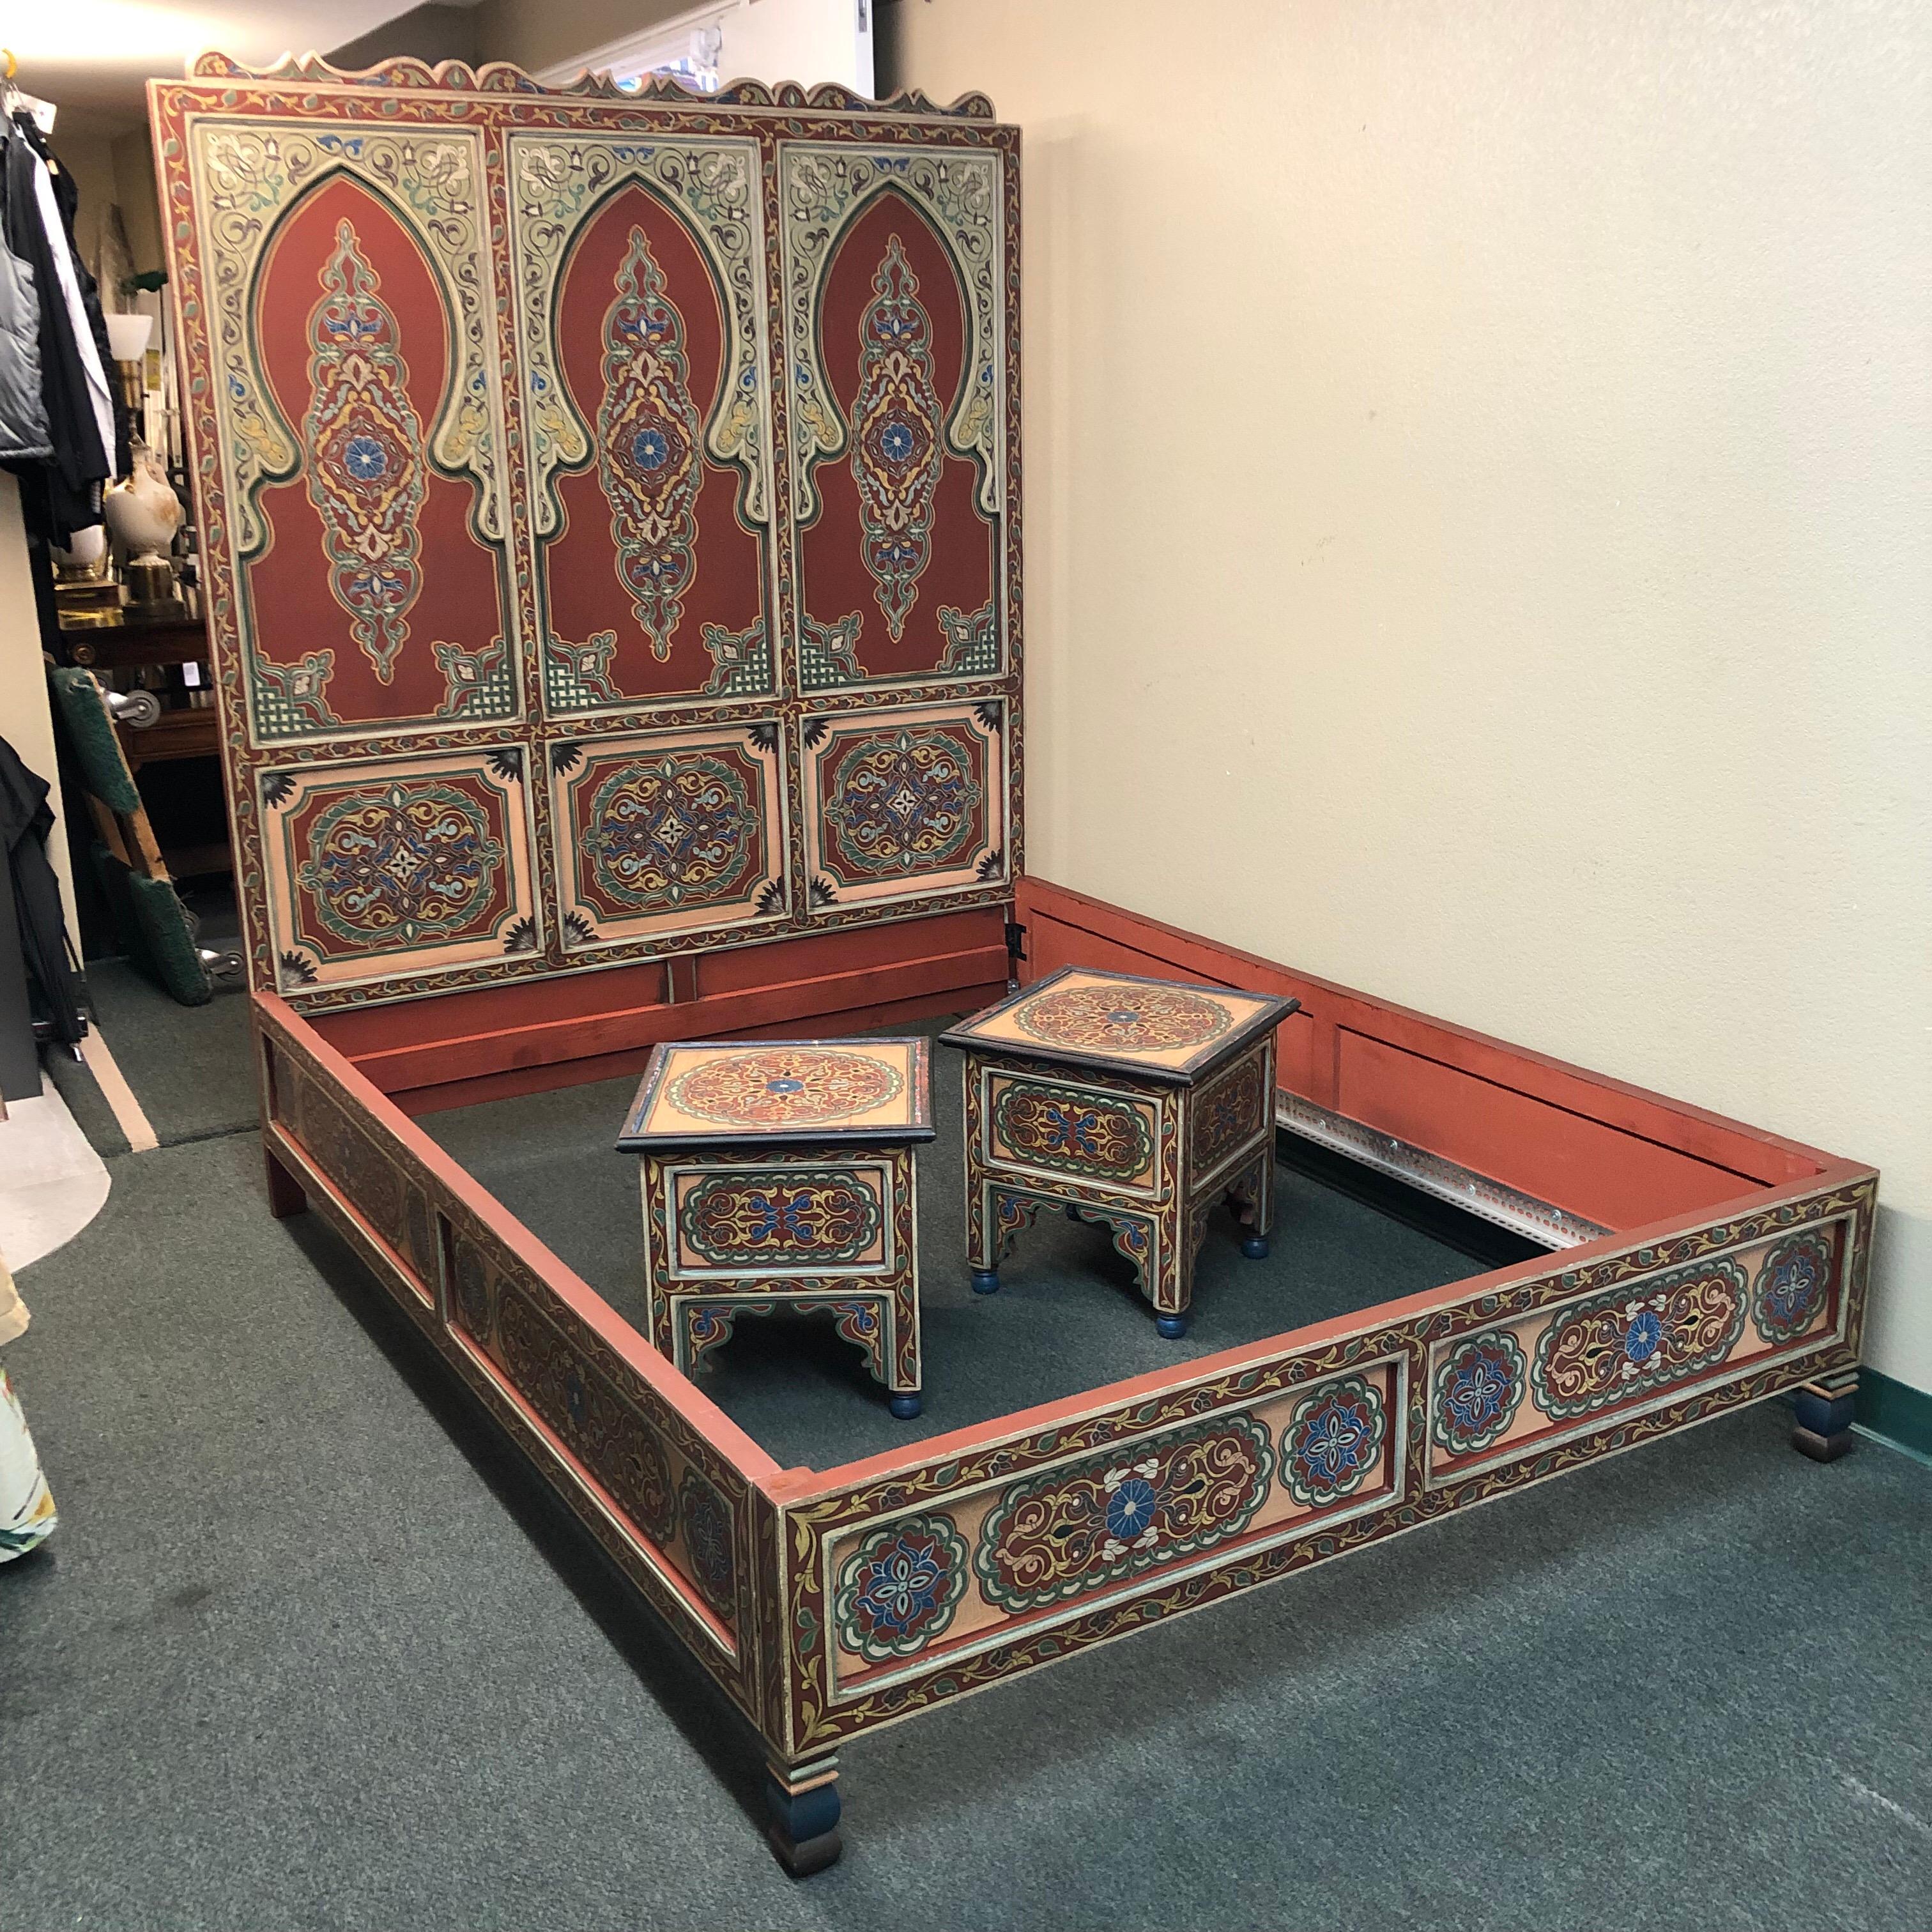 A stunning custom bedroom set, handcrafted in Morocco. Referencing traditional carved elements and rich colors of the country, the queen bed frame and pair of nightstands are an exotic delight that transports one to another time and place. Three